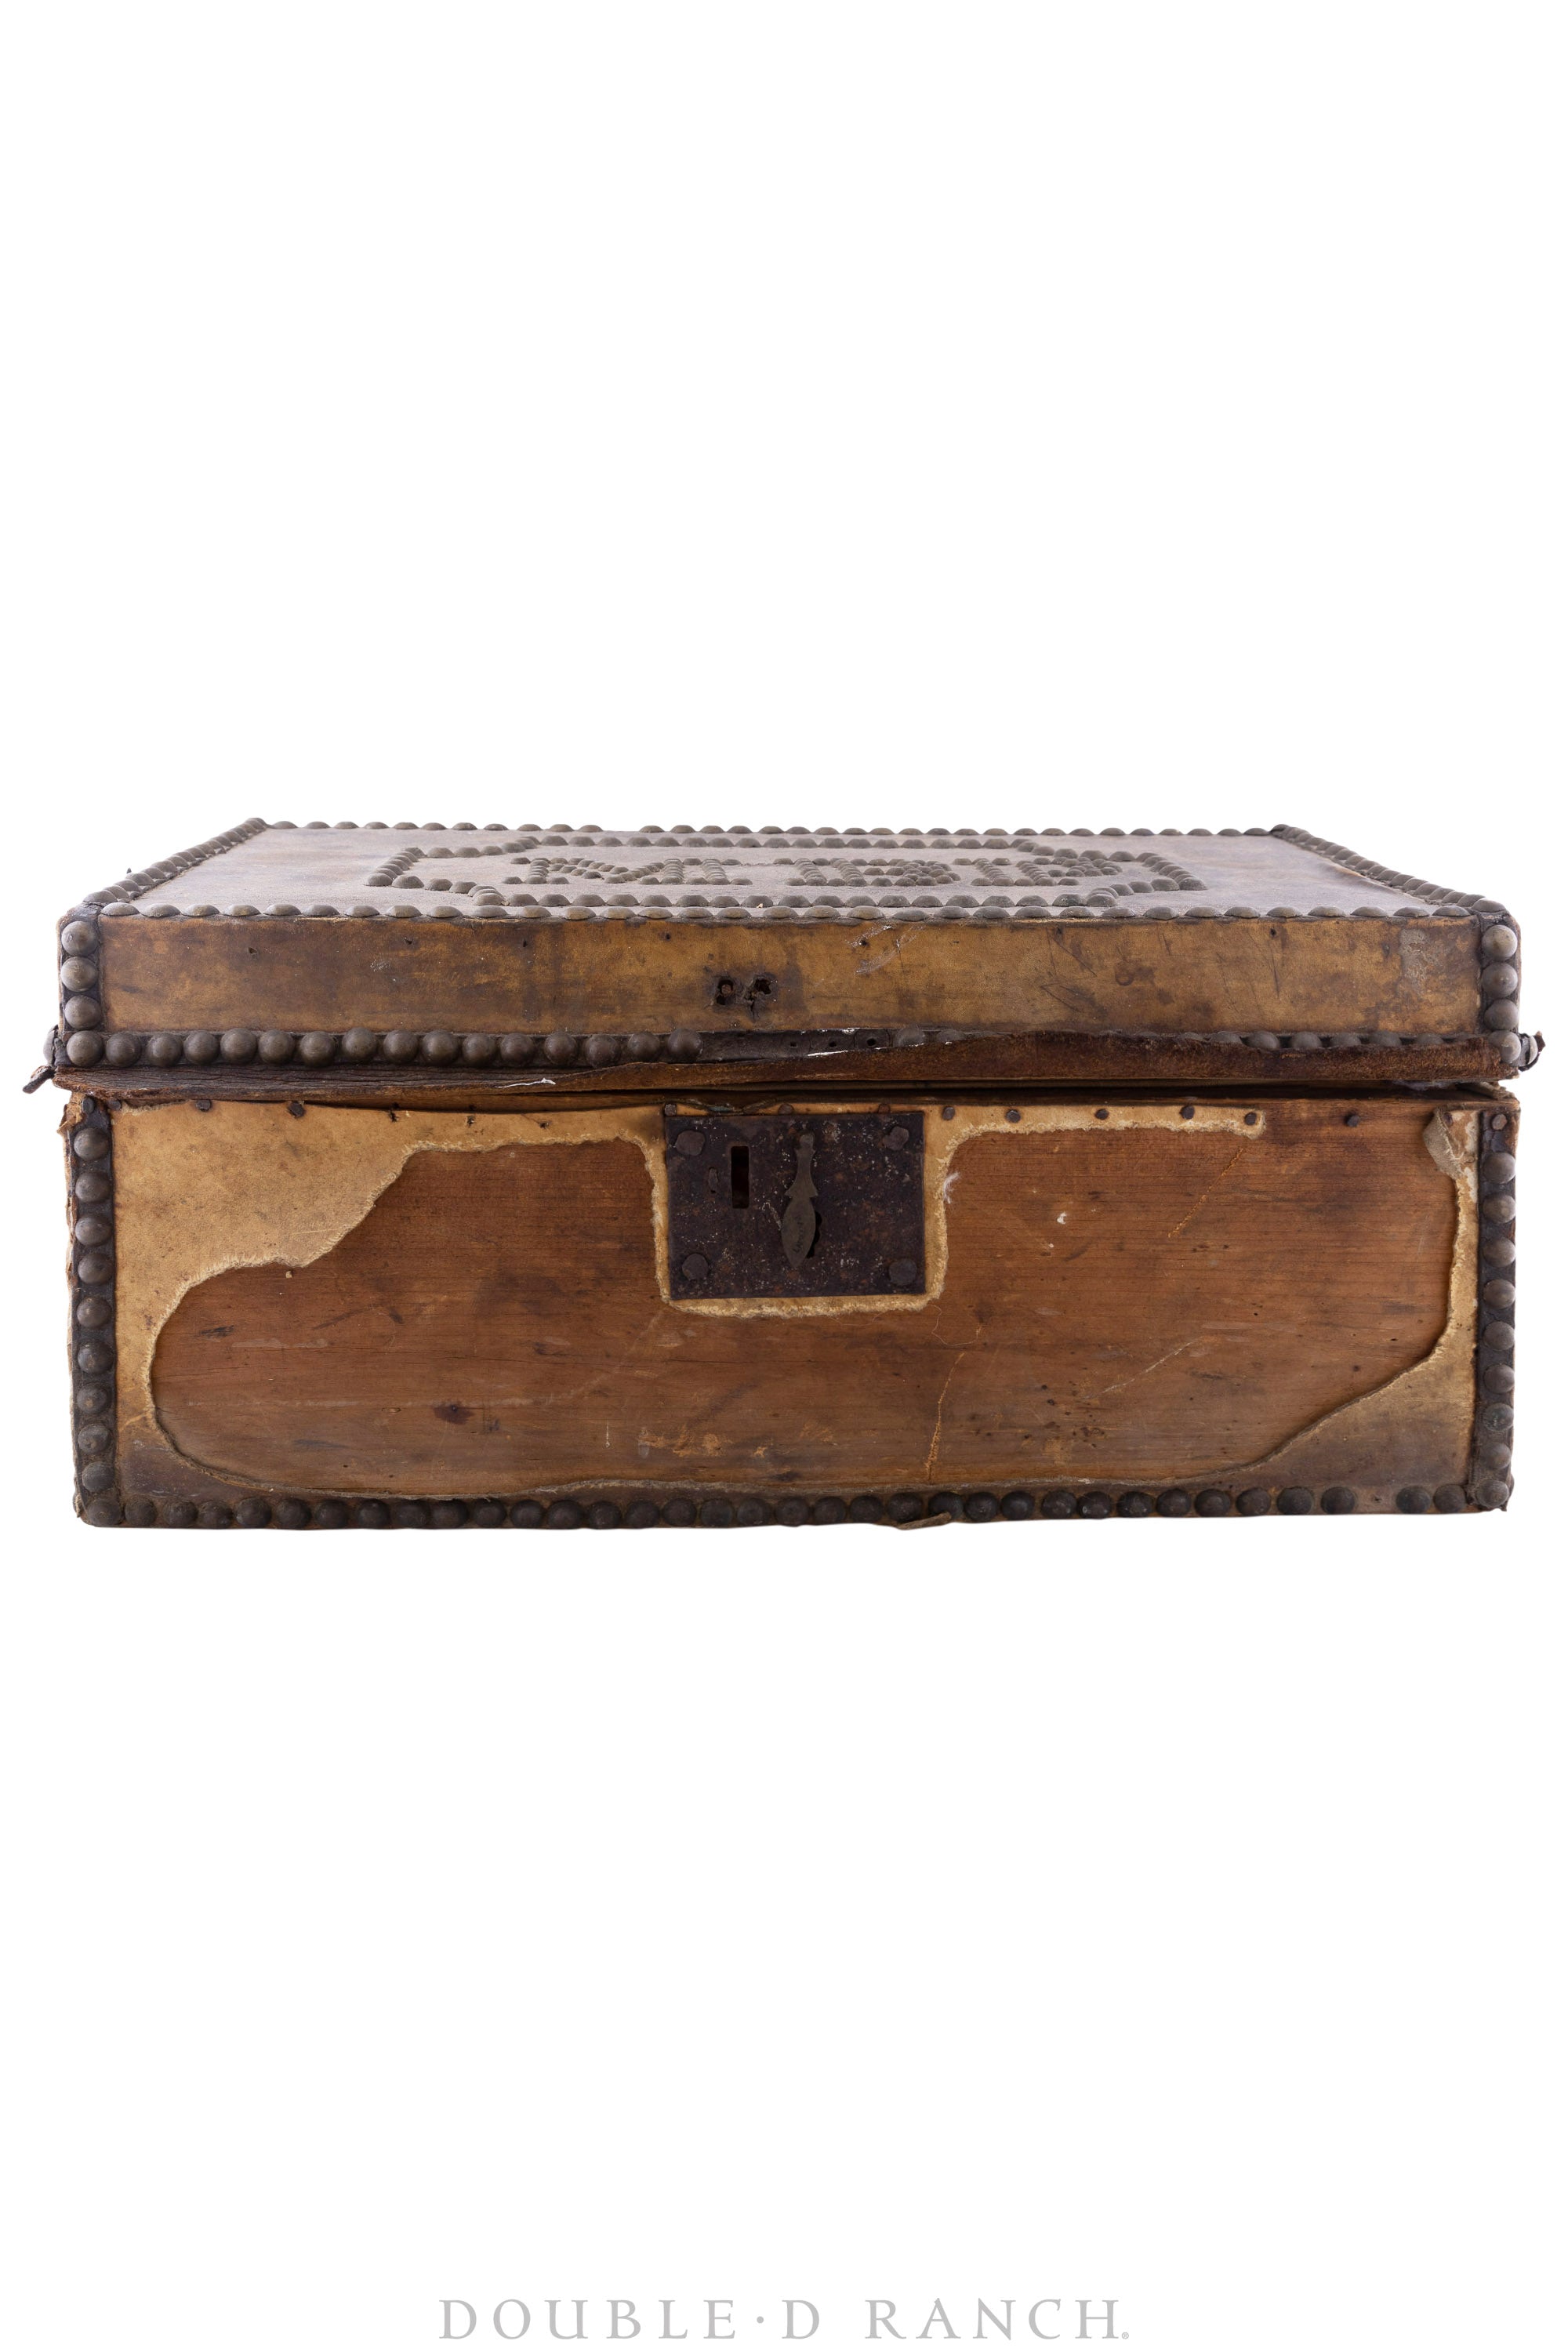 Miscellaneous, Box, Hide Covered, Studded, Vintage, Early 20th Century, 559